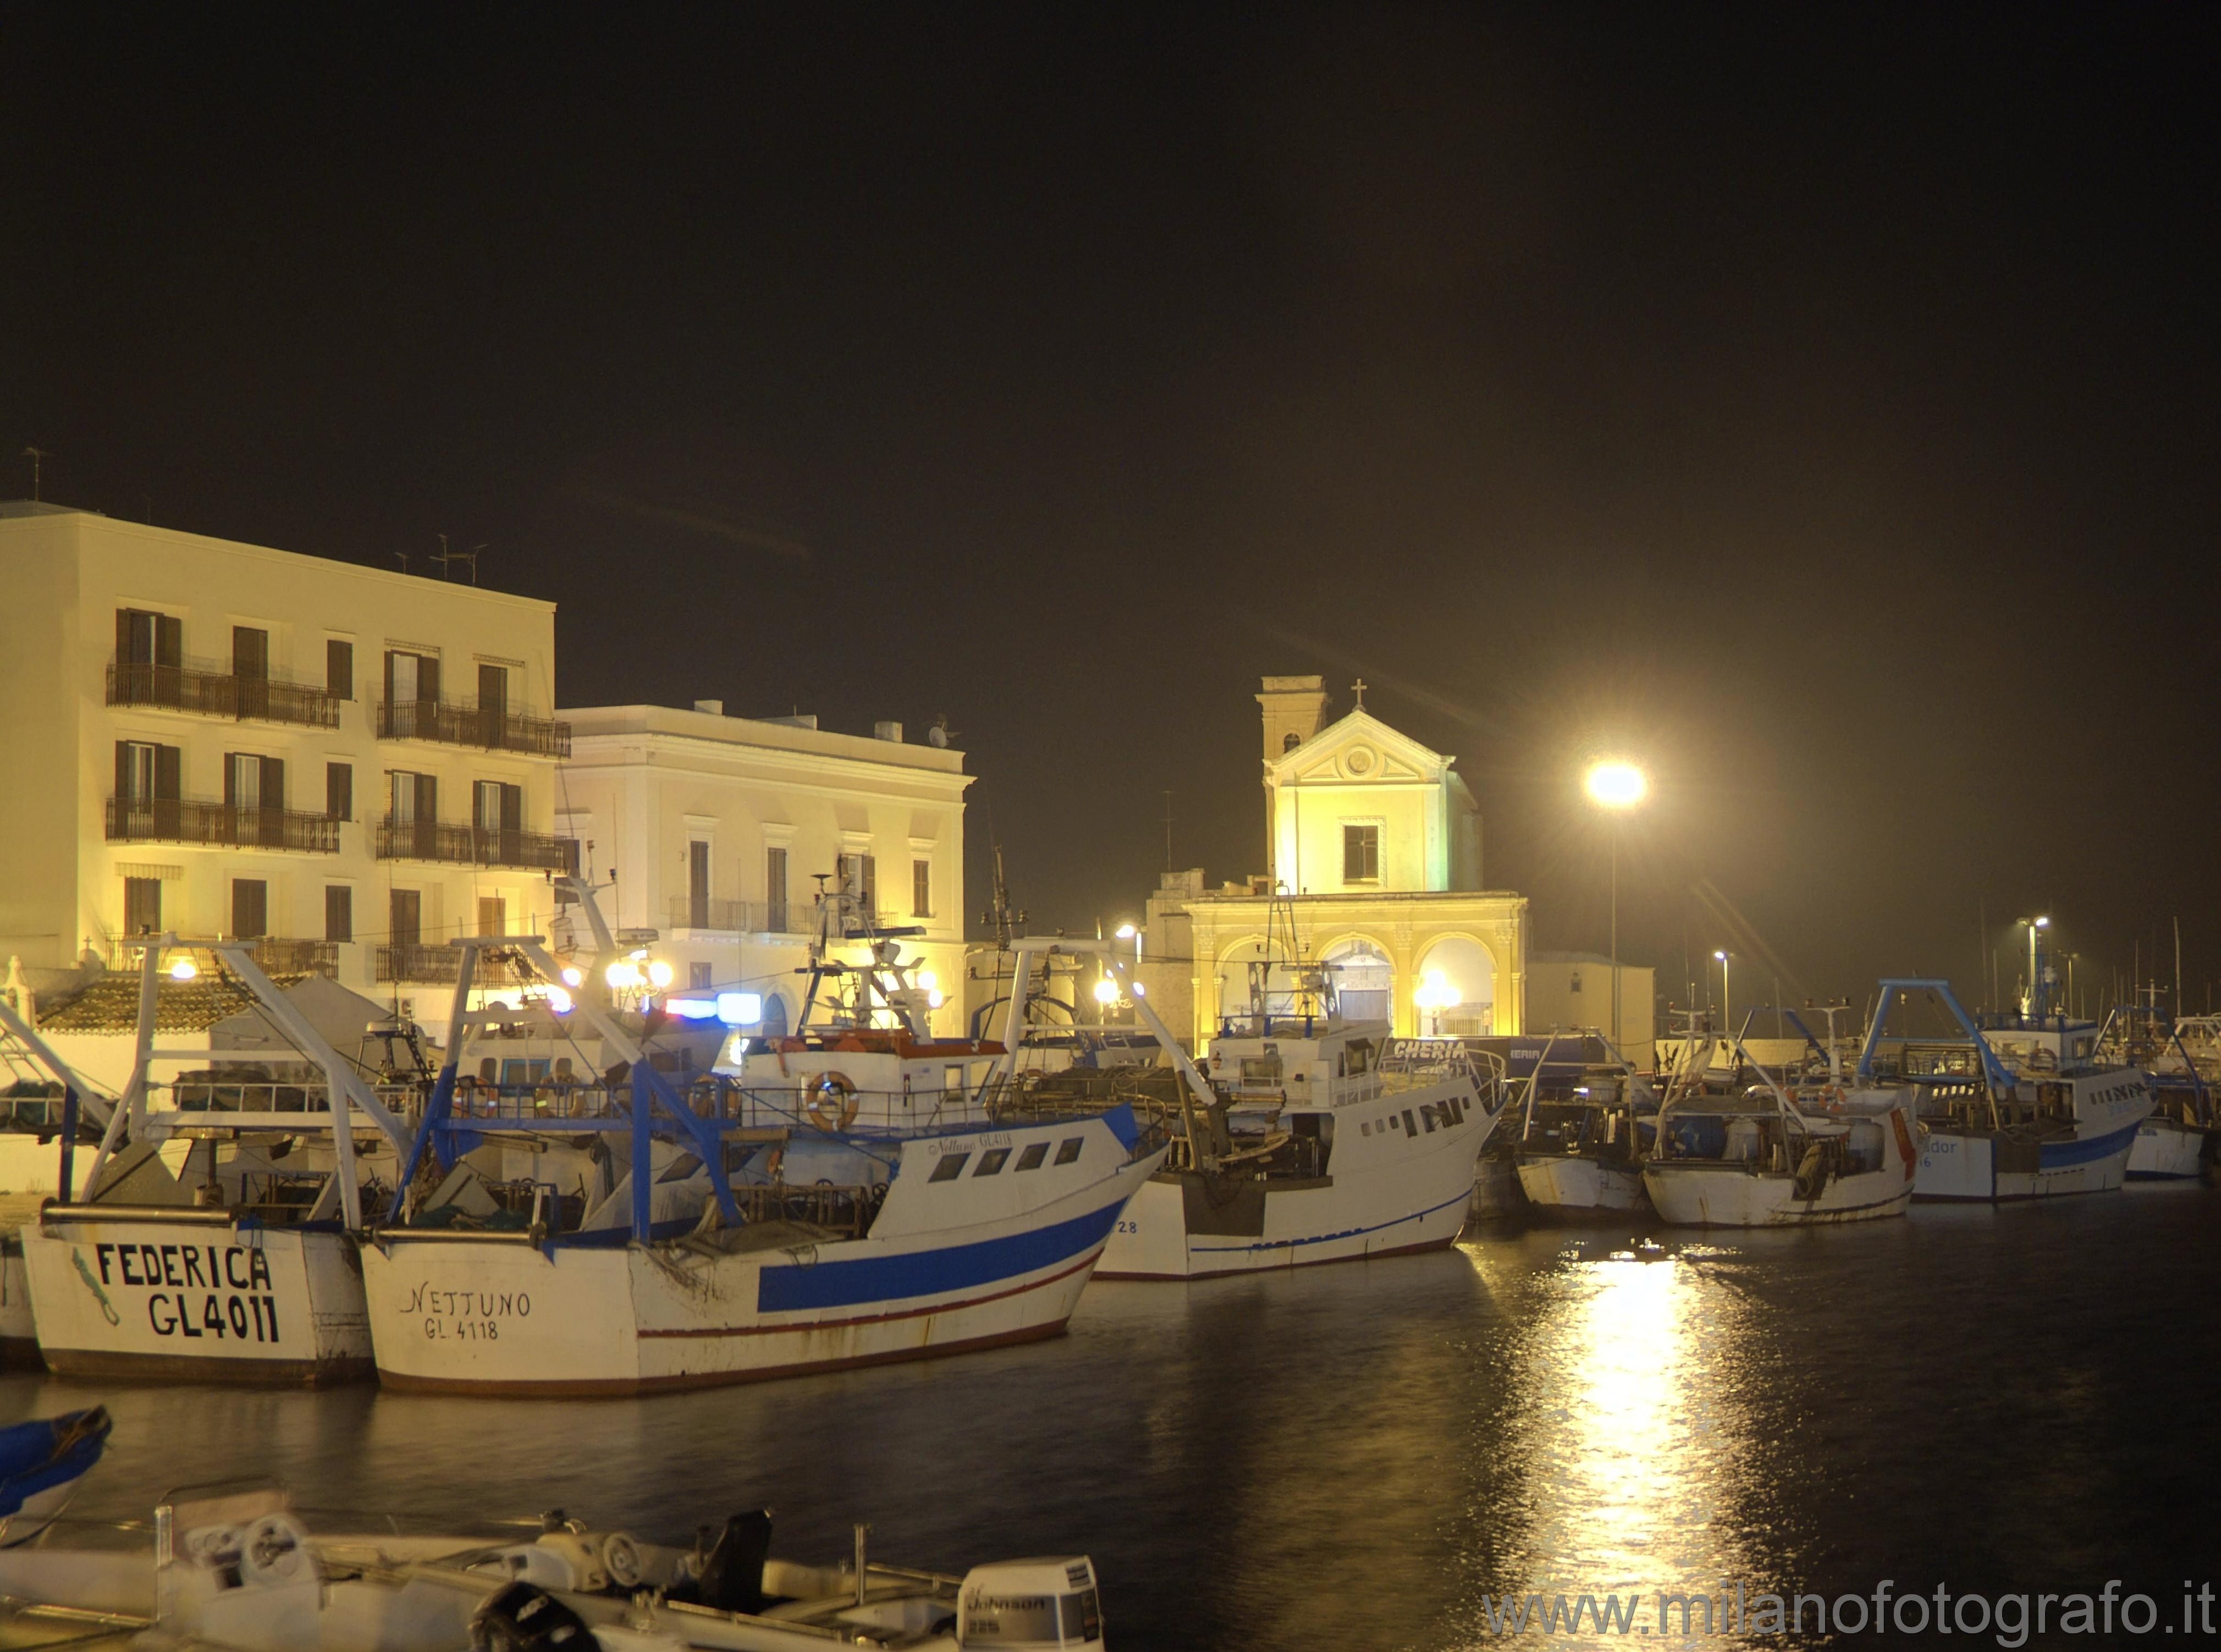 Gallipoli (Lecce, Italy): Part of the harbour - Gallipoli (Lecce, Italy)